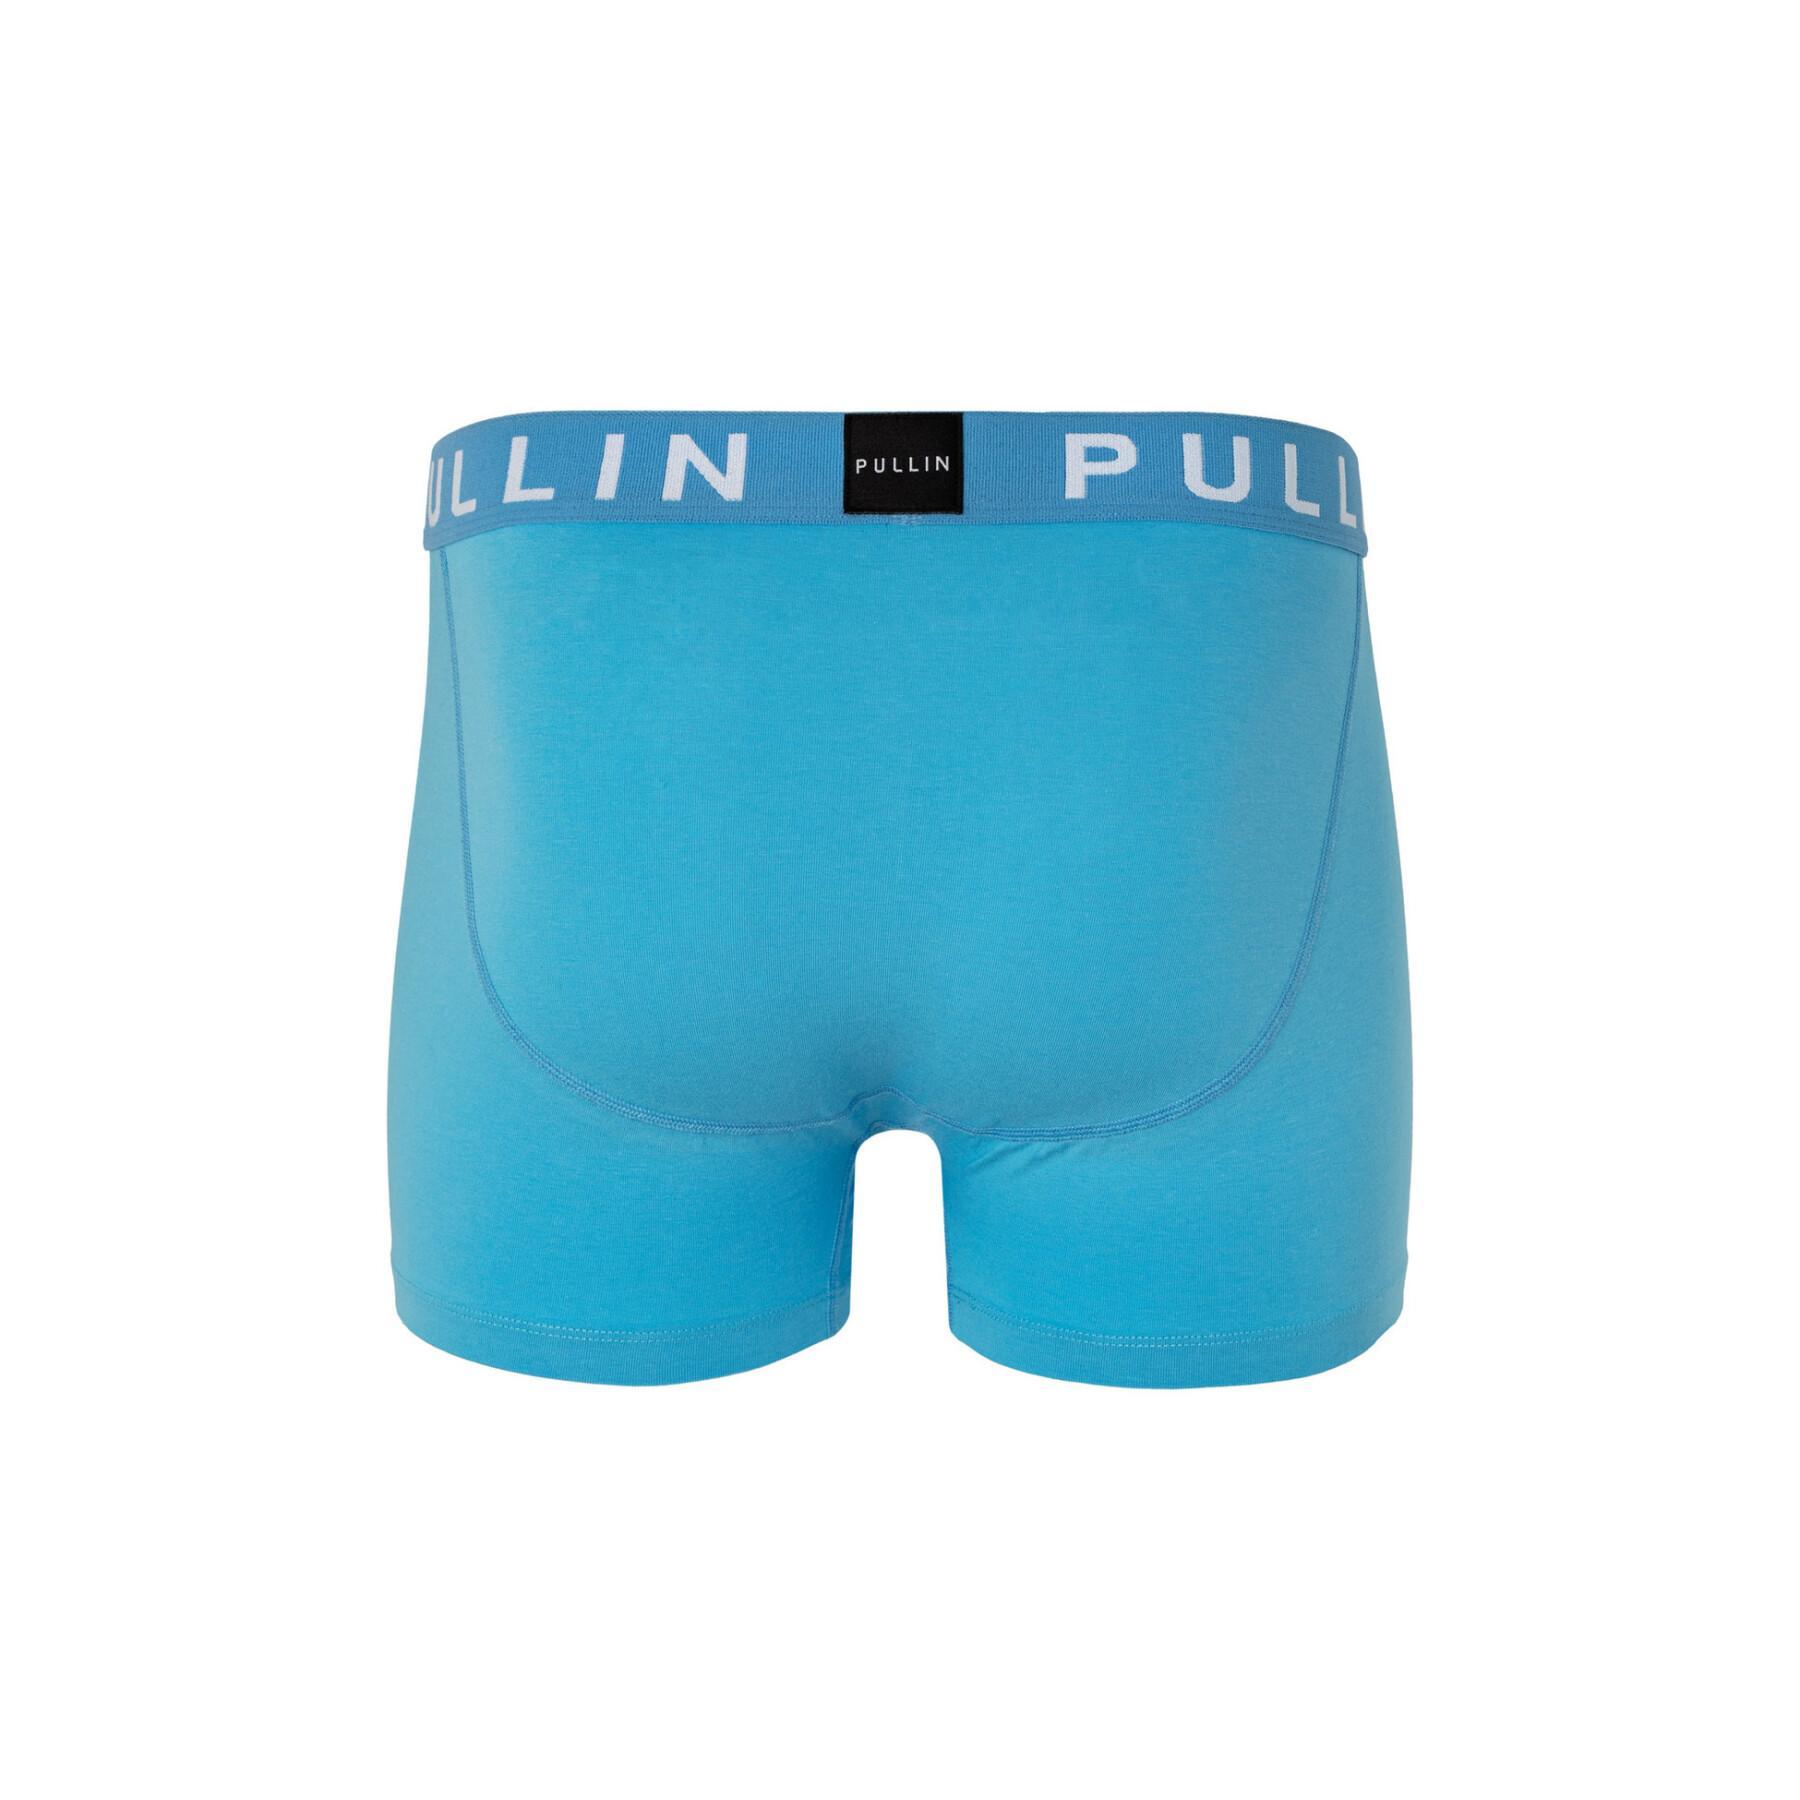 Cotton boxer shorts Pull-In master